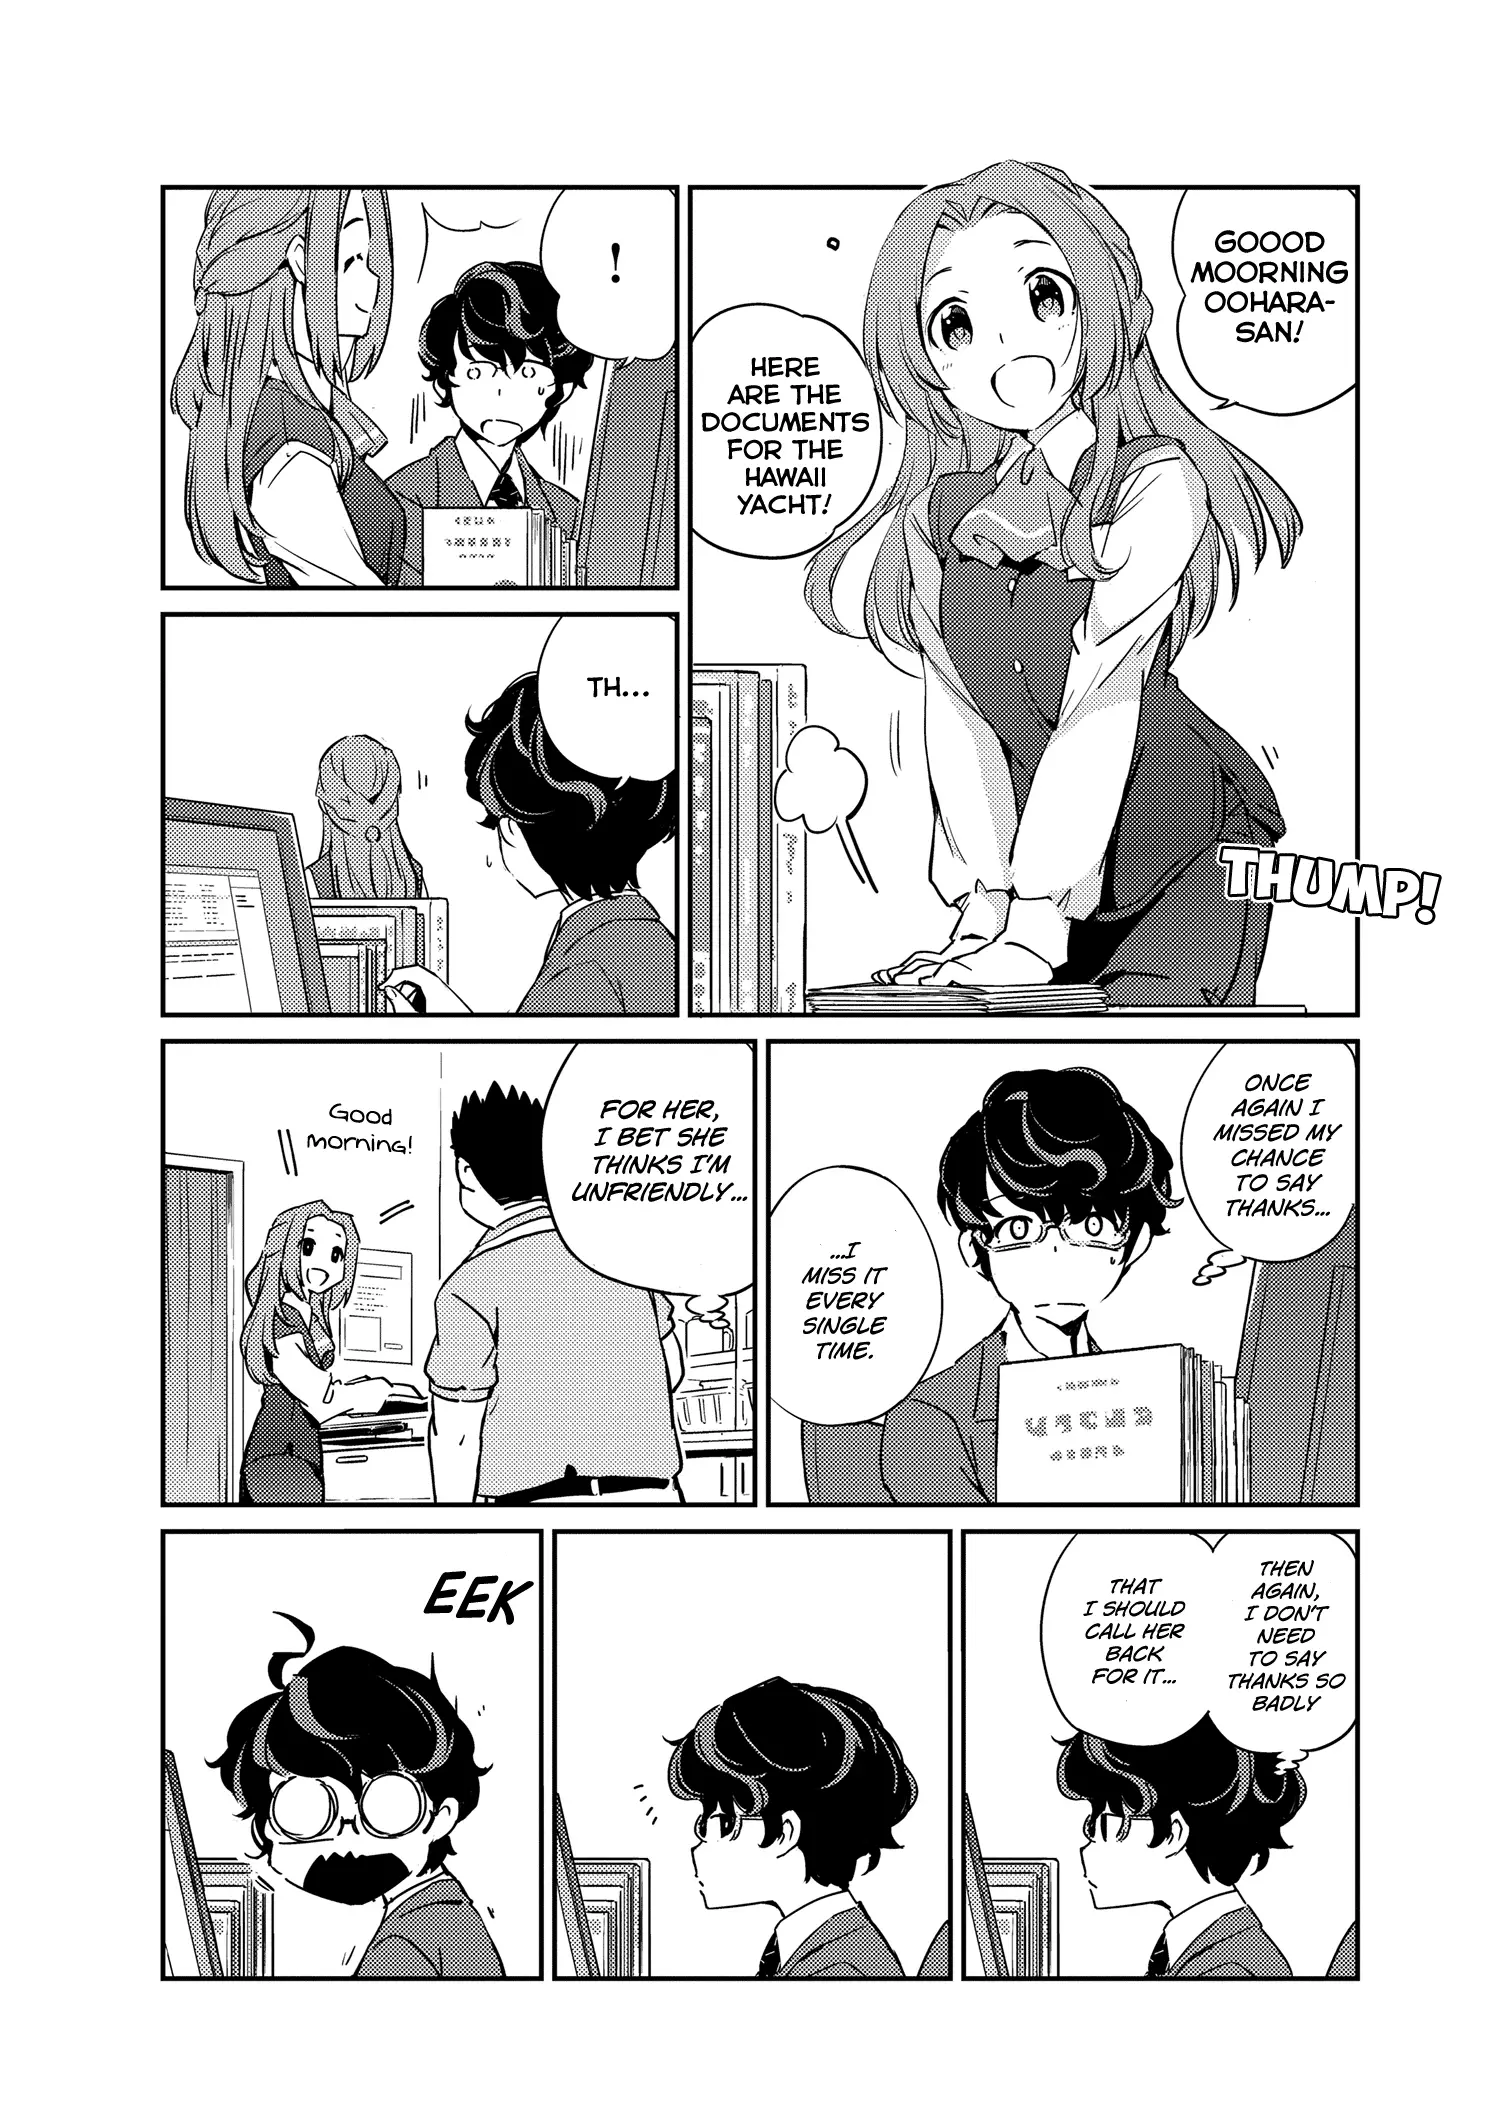 Are You Really Getting Married? - 1 page 7